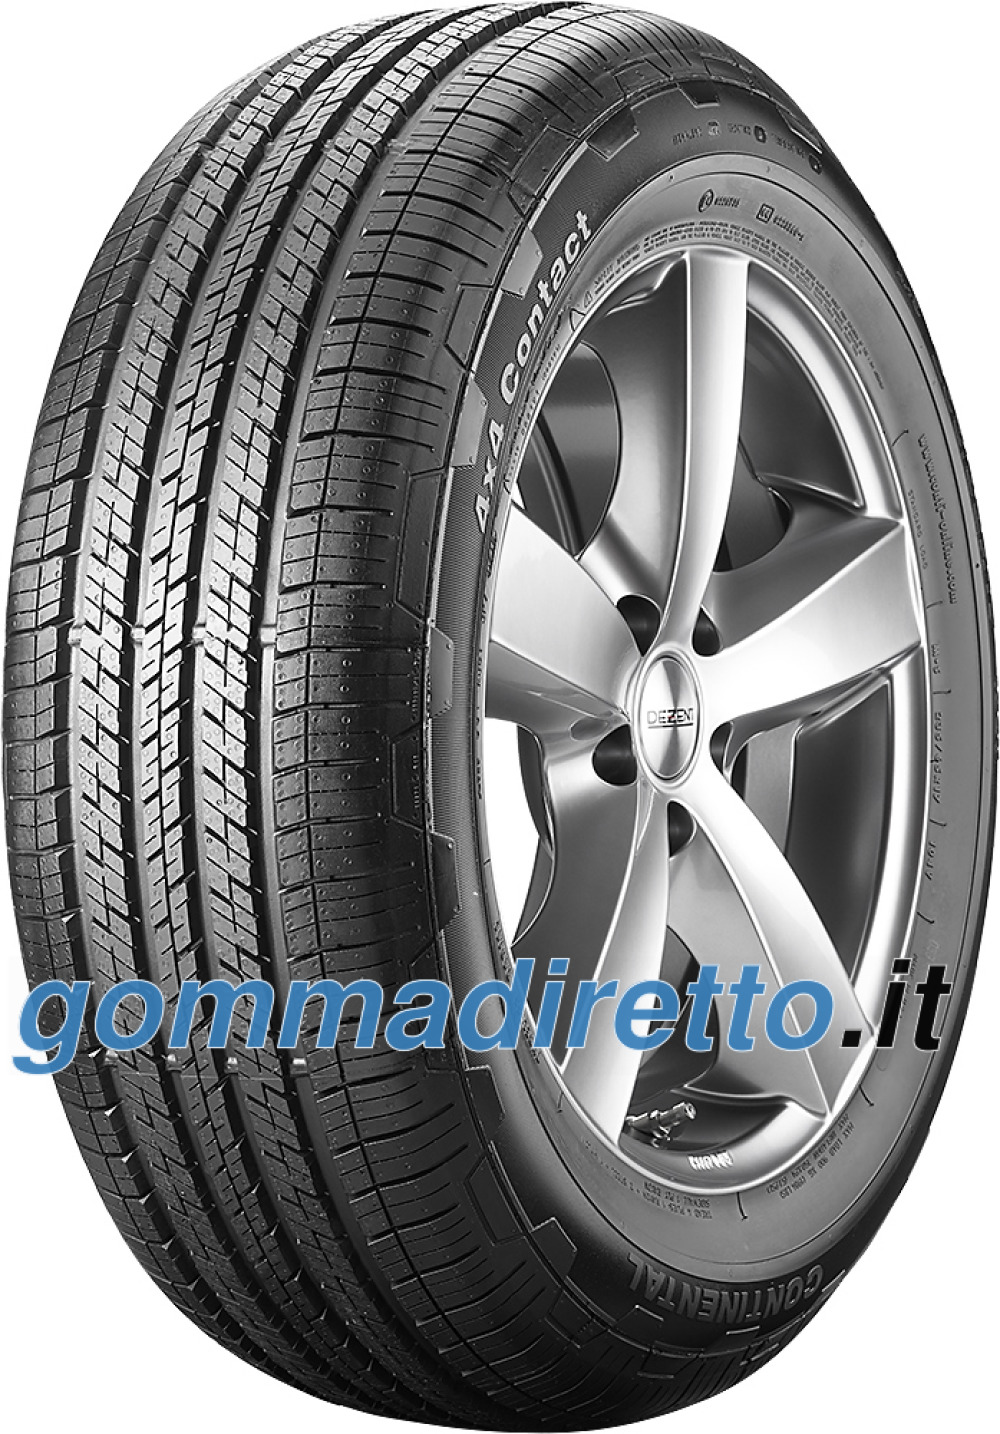 Image of        Continental 4X4 Contact ( 235/50 R18 101H XL )